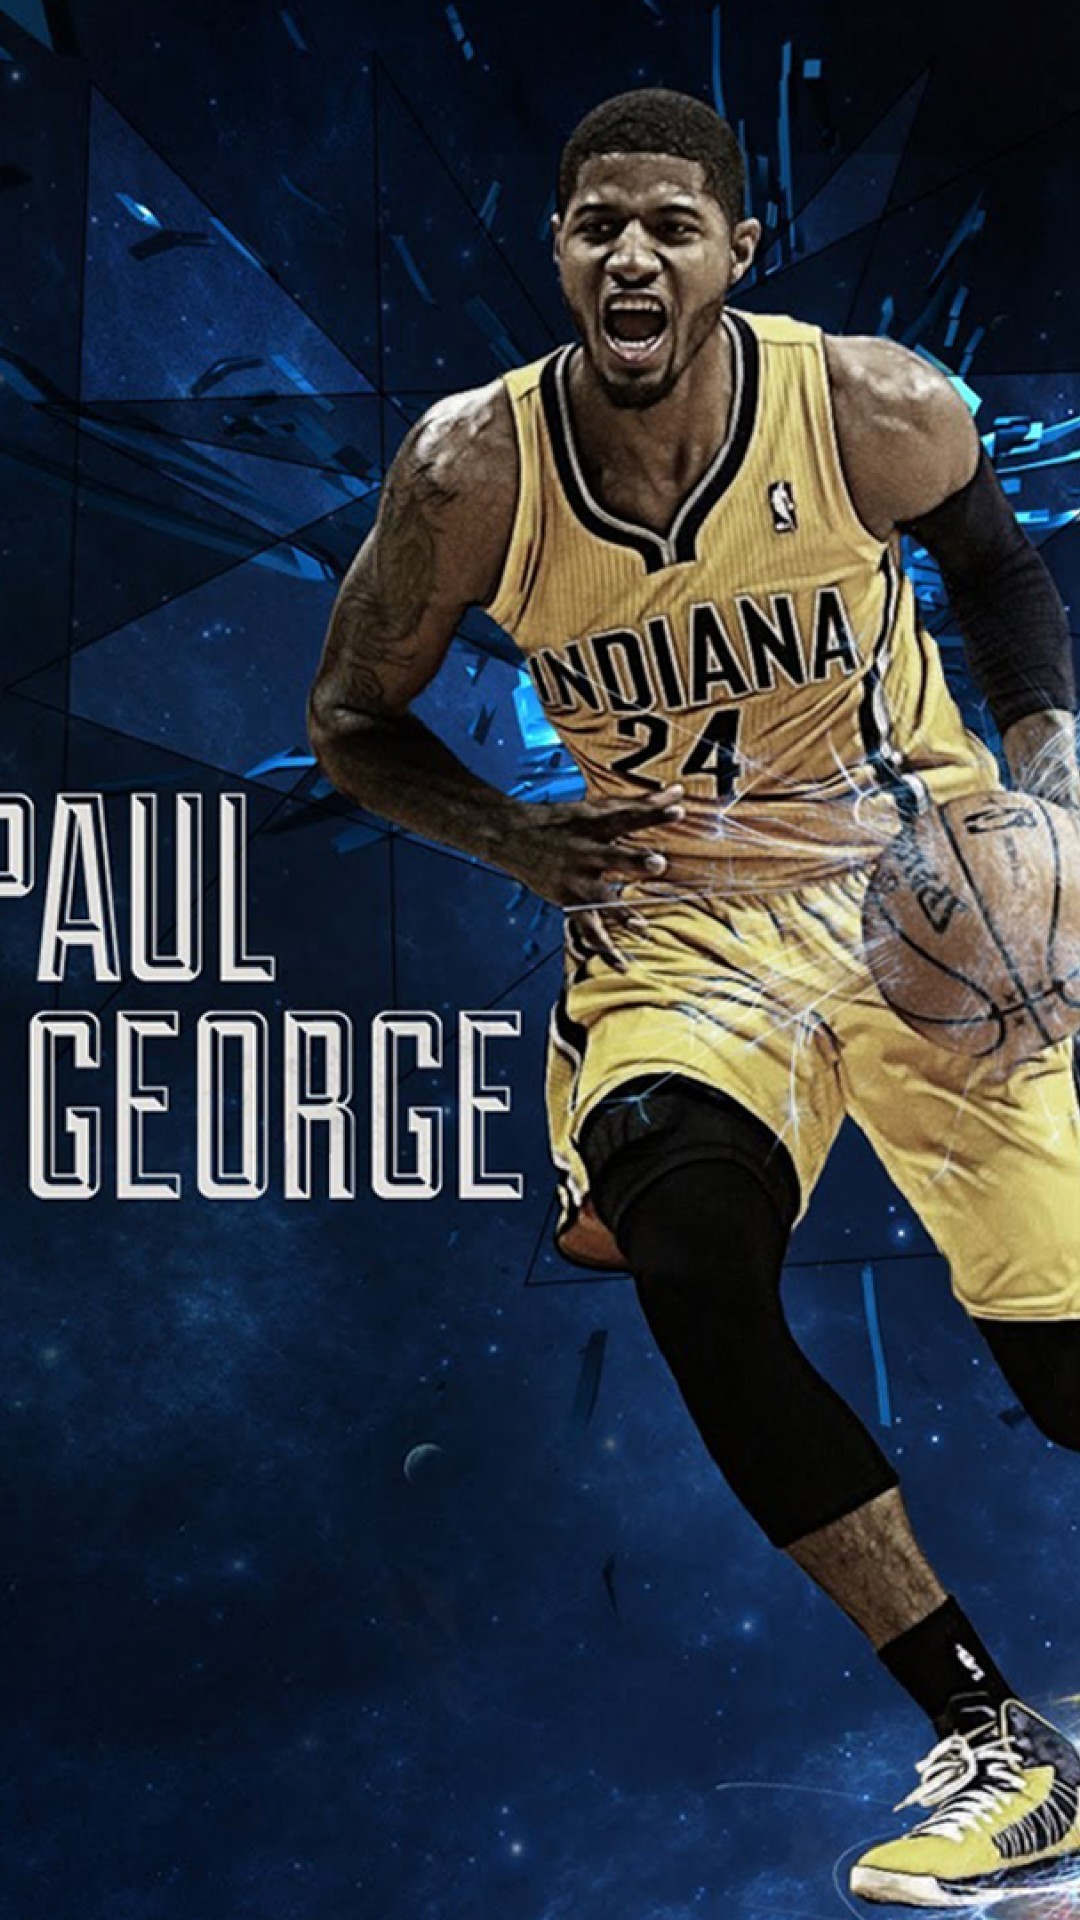 1080x1920 Photo: High Definition Paul George IPhone Images - HD Wallpapers